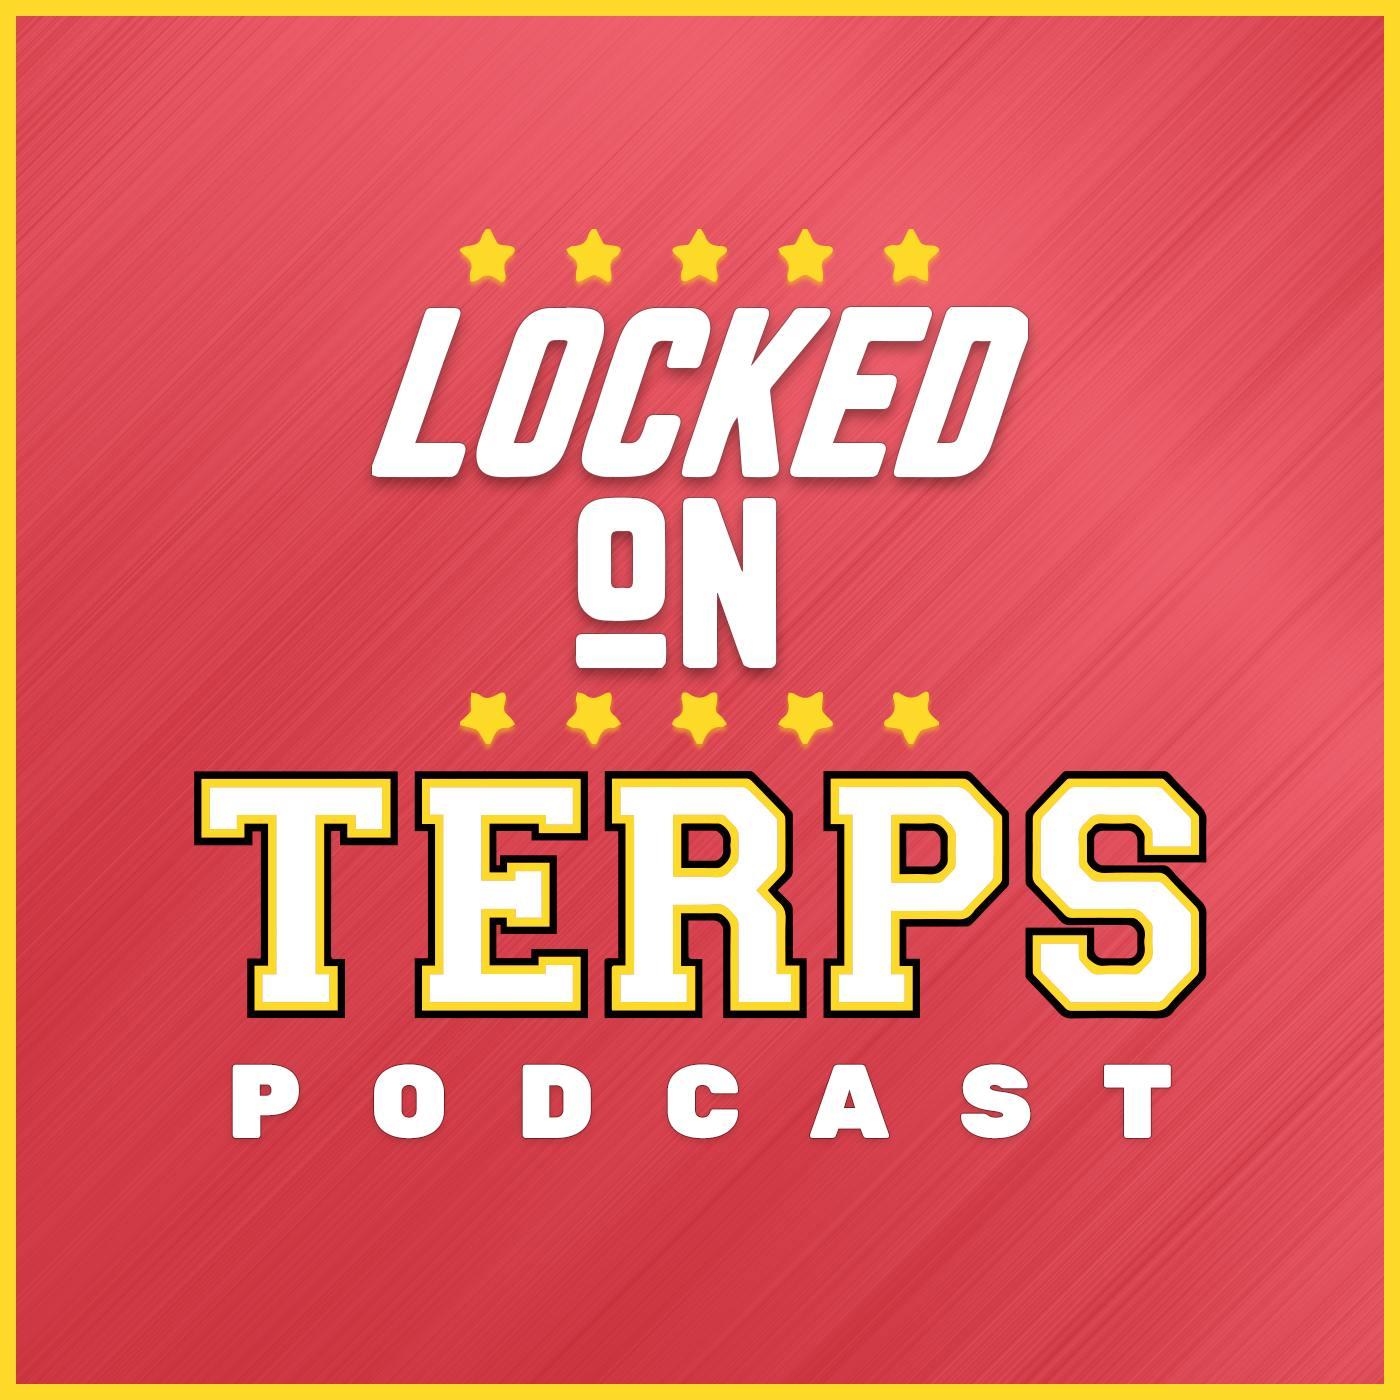 Show poster of Locked On Terps - Daily Podcast on Maryland Terrapins Football & Basketball